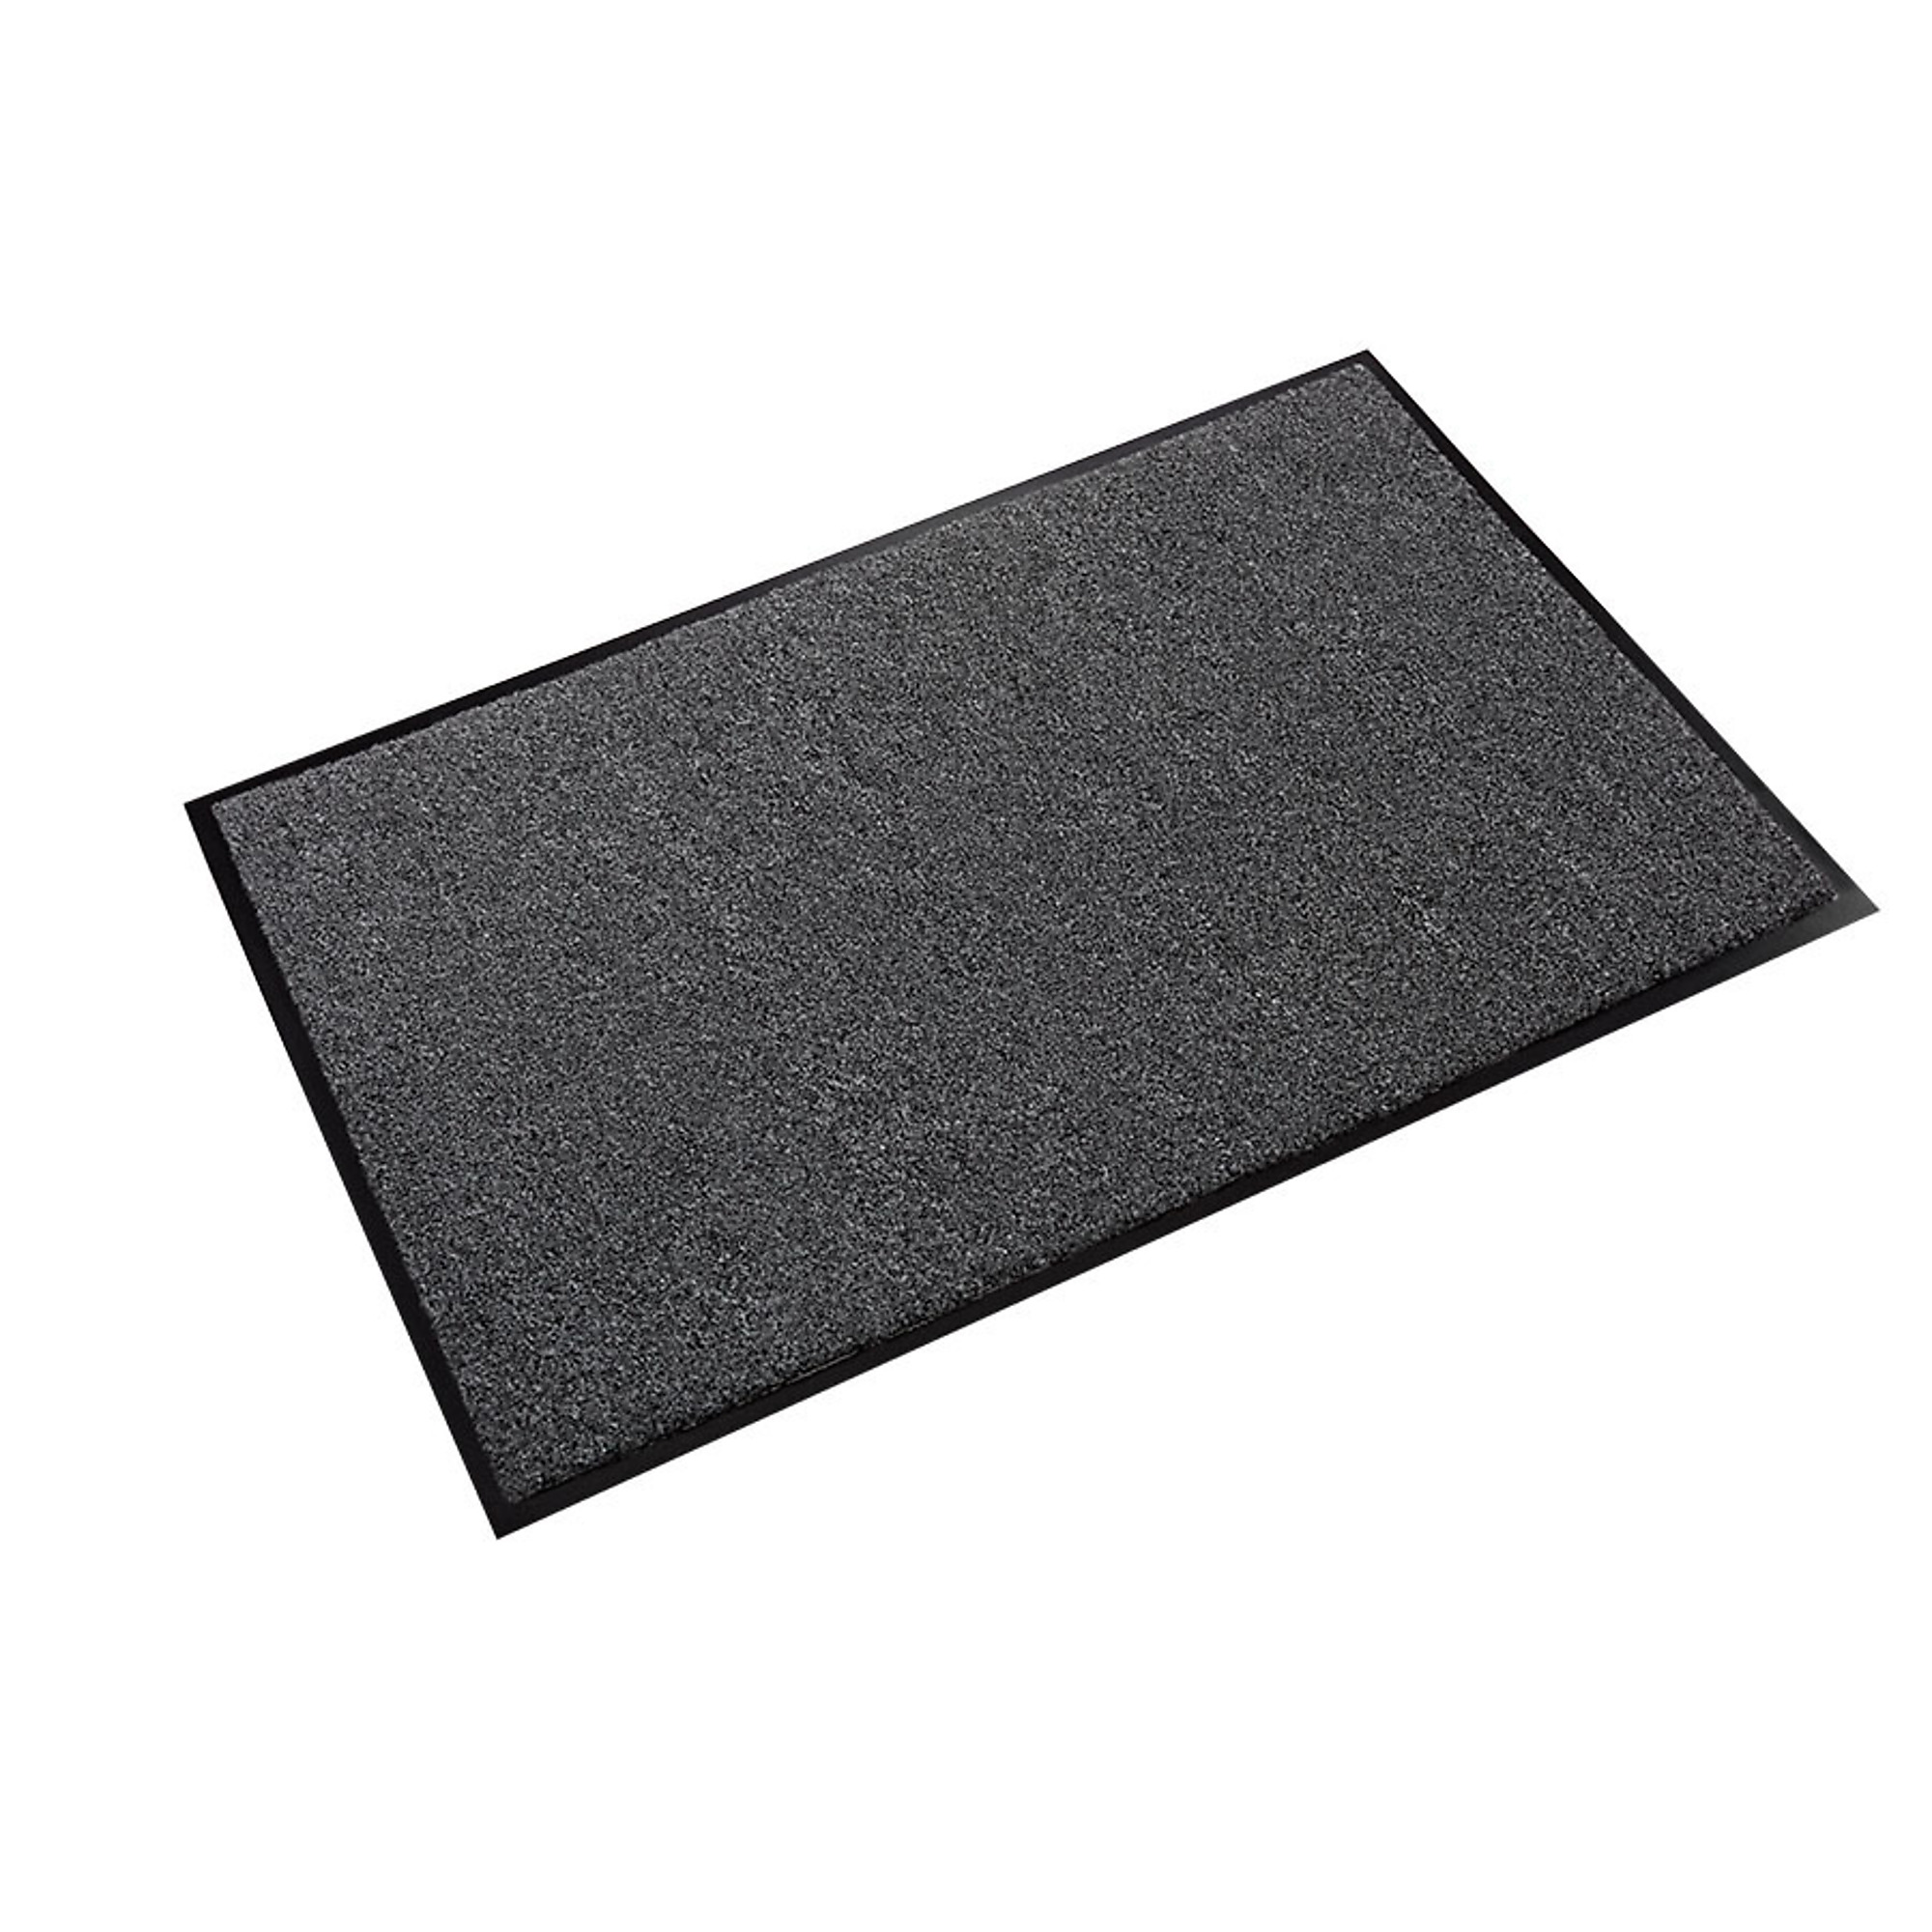 Crown Matting Technologies, Rely-On Olefin 4ft.x6ft. Charcoal, Width 48 in, Length 72 in, Thickness 3/8 in, Model GS 0046CH